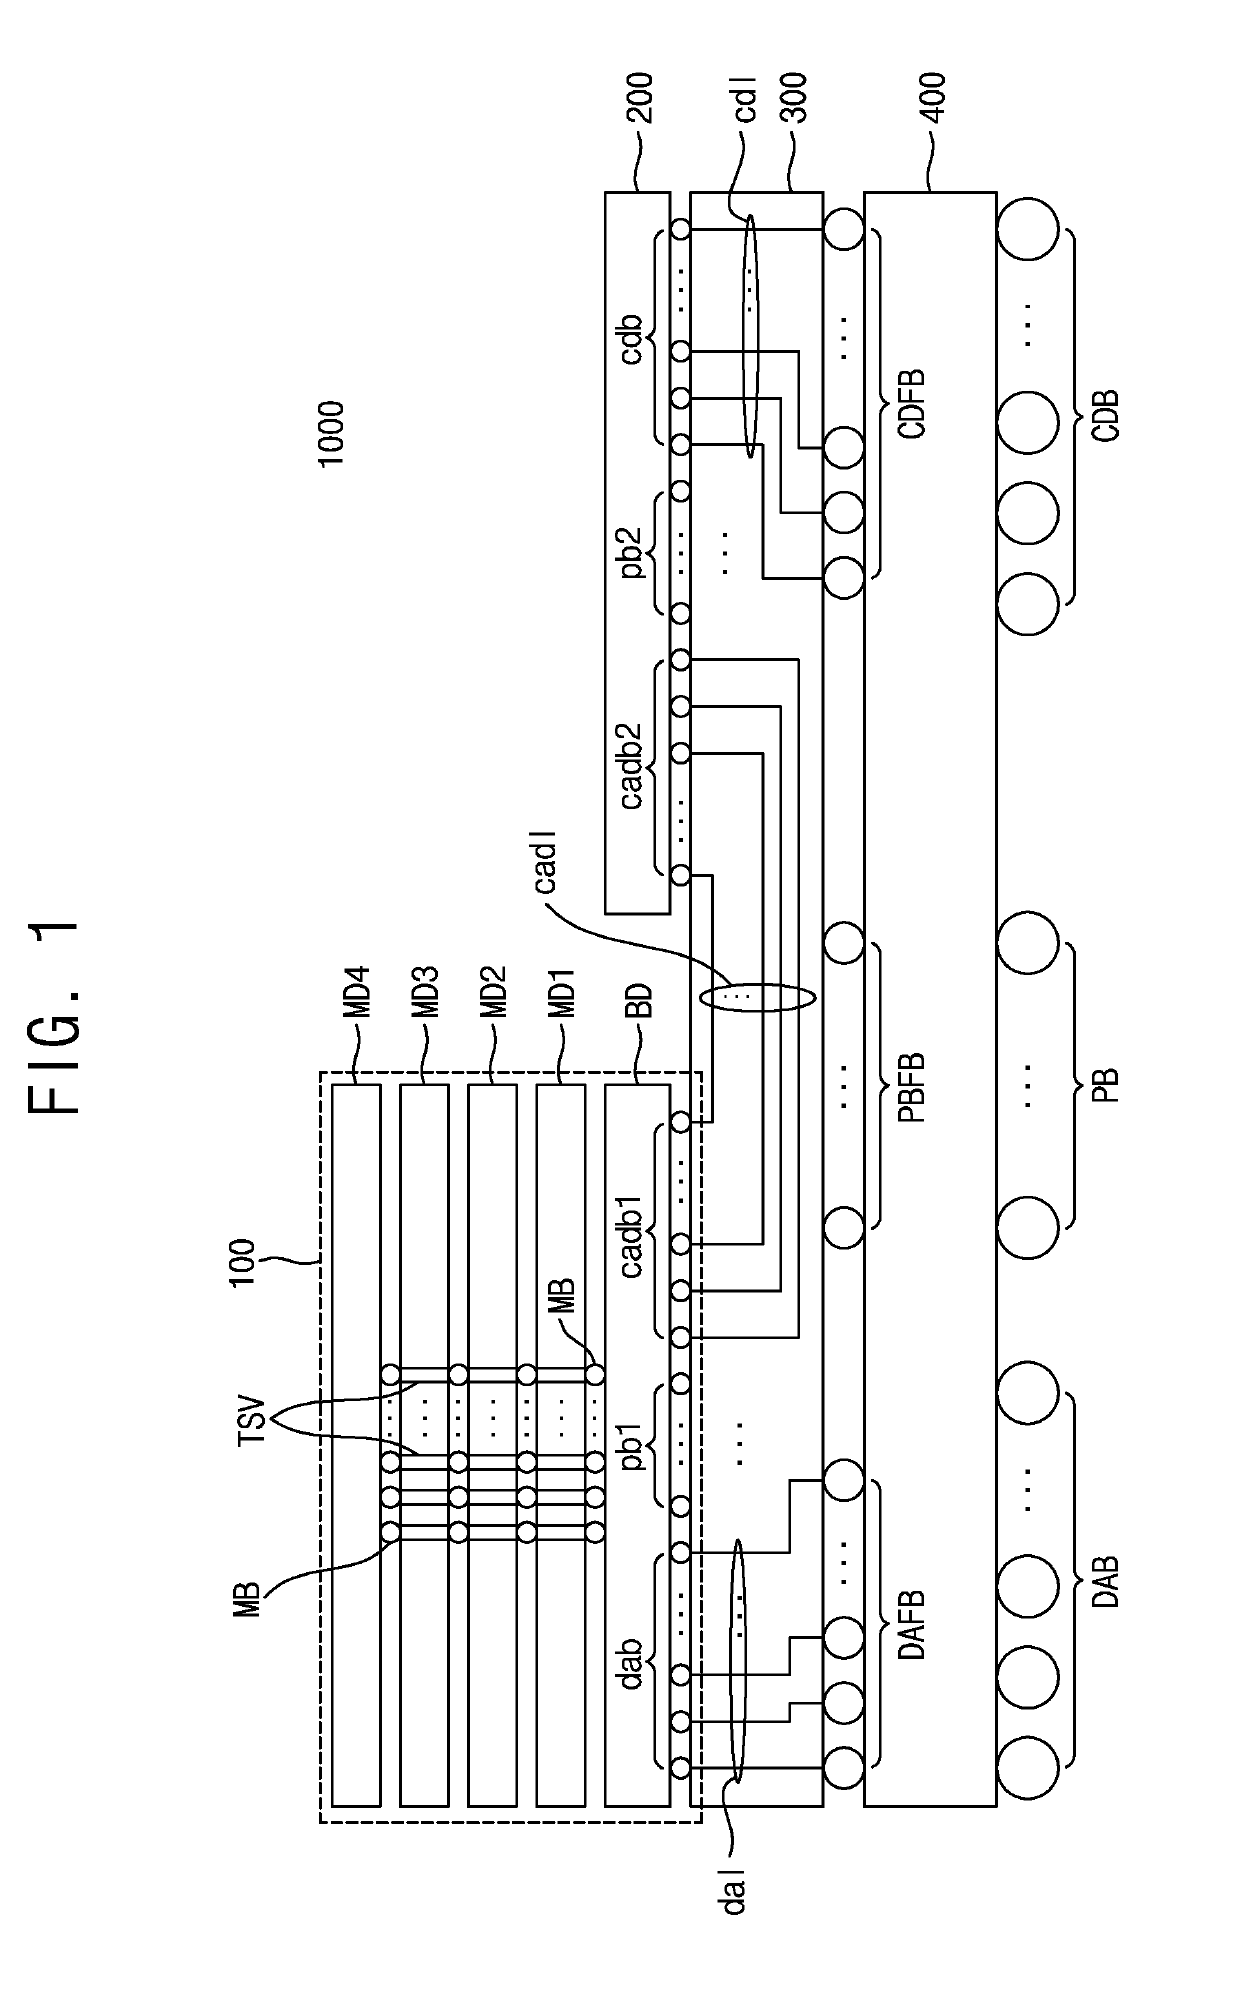 High bandwidth memory device and system device having the same